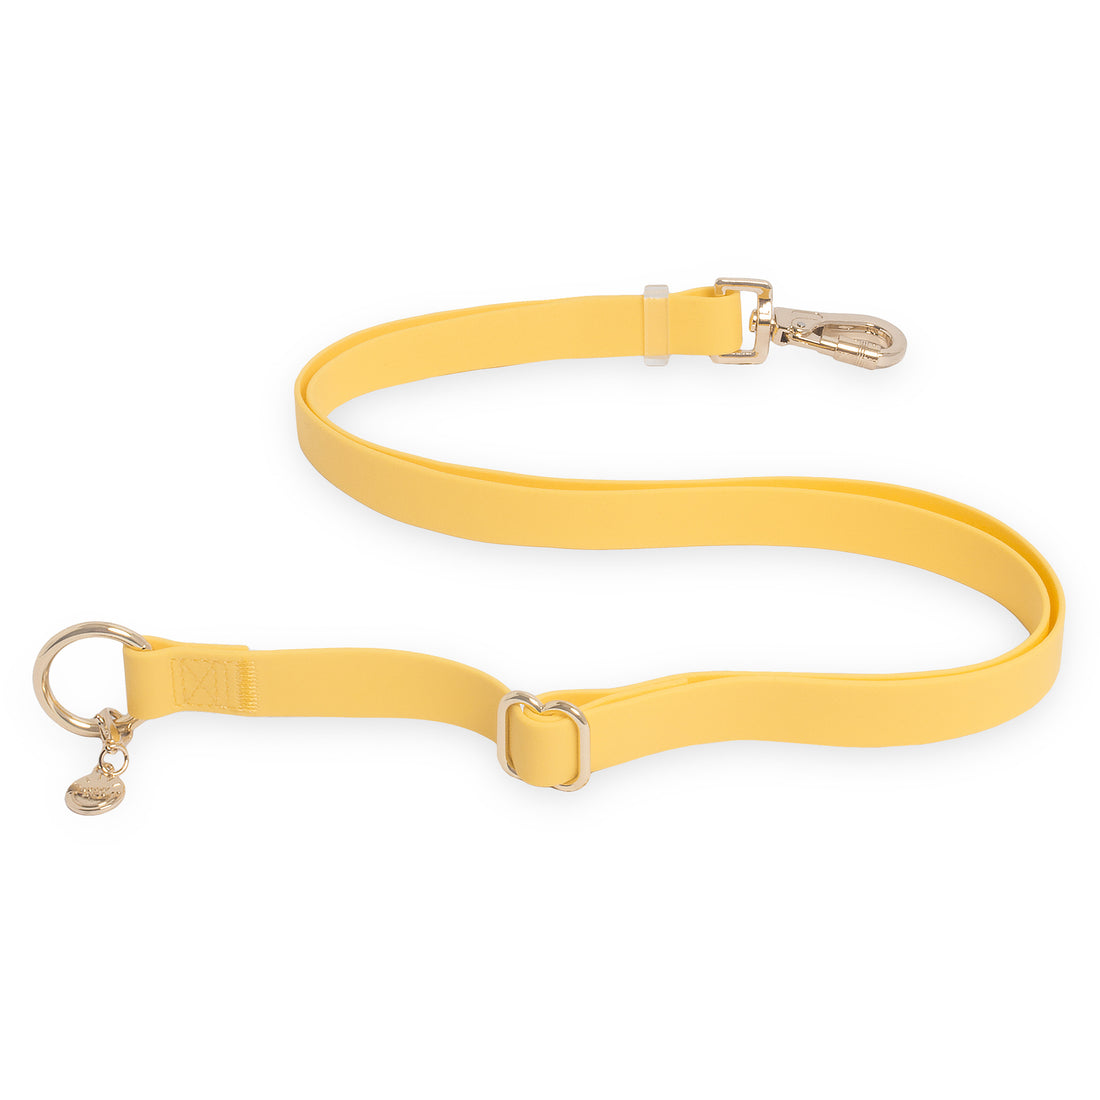 Dandelion Yellow Cloud Leash 4-Way Extension 3/4" | Leash Connector | Extend Leash, Walk 2 Dogs, or Add a Traffic Handle